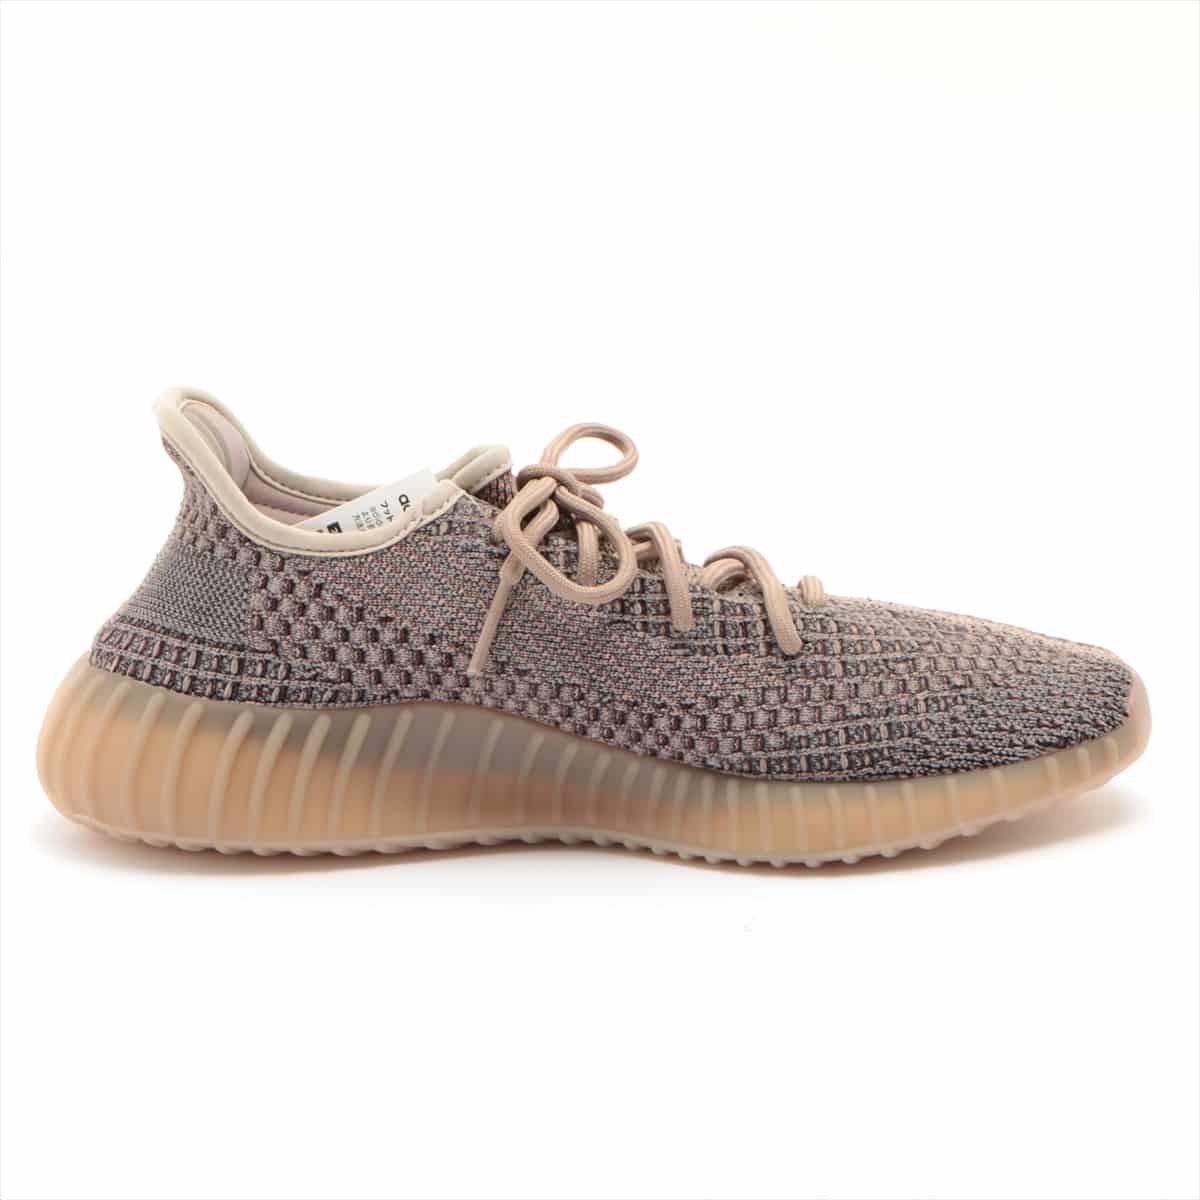 adidas x Kanye West YEEZY BOOST 350 V2 Fabric Sneakers 27.5㎝ Men's pink purple H02795 fades